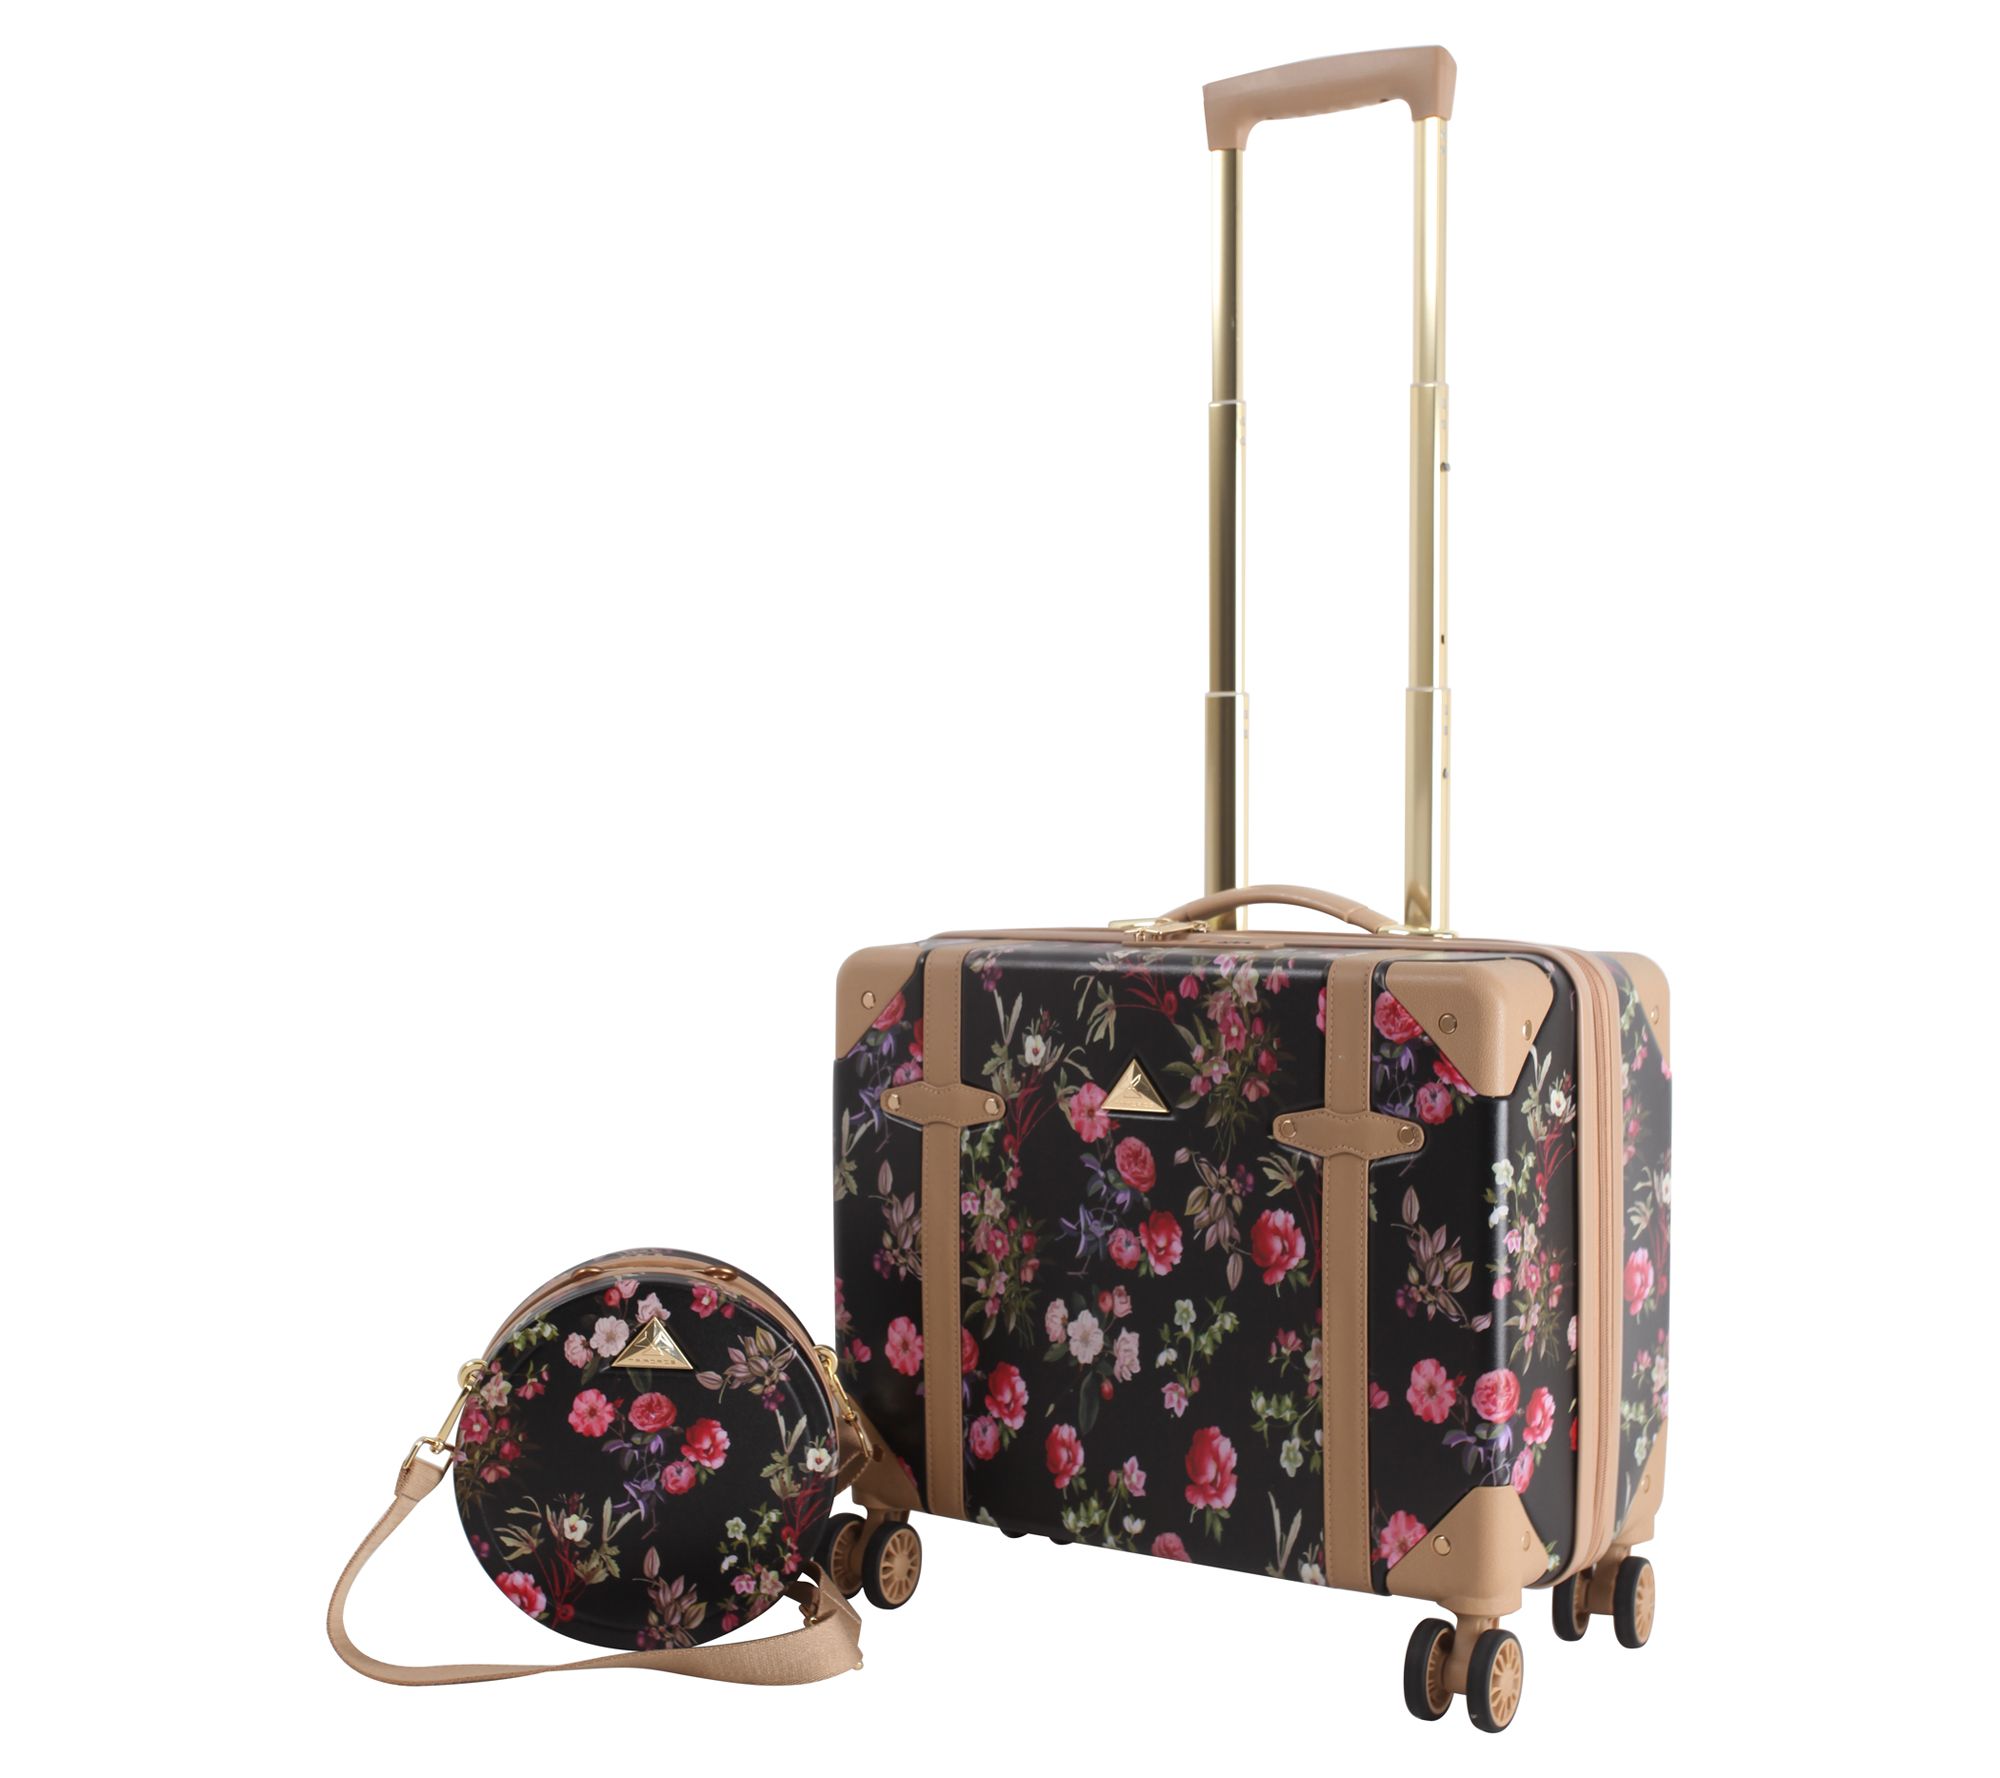 Louis Vuitton Travel Luggage Set in Surulere - Bags, Peace